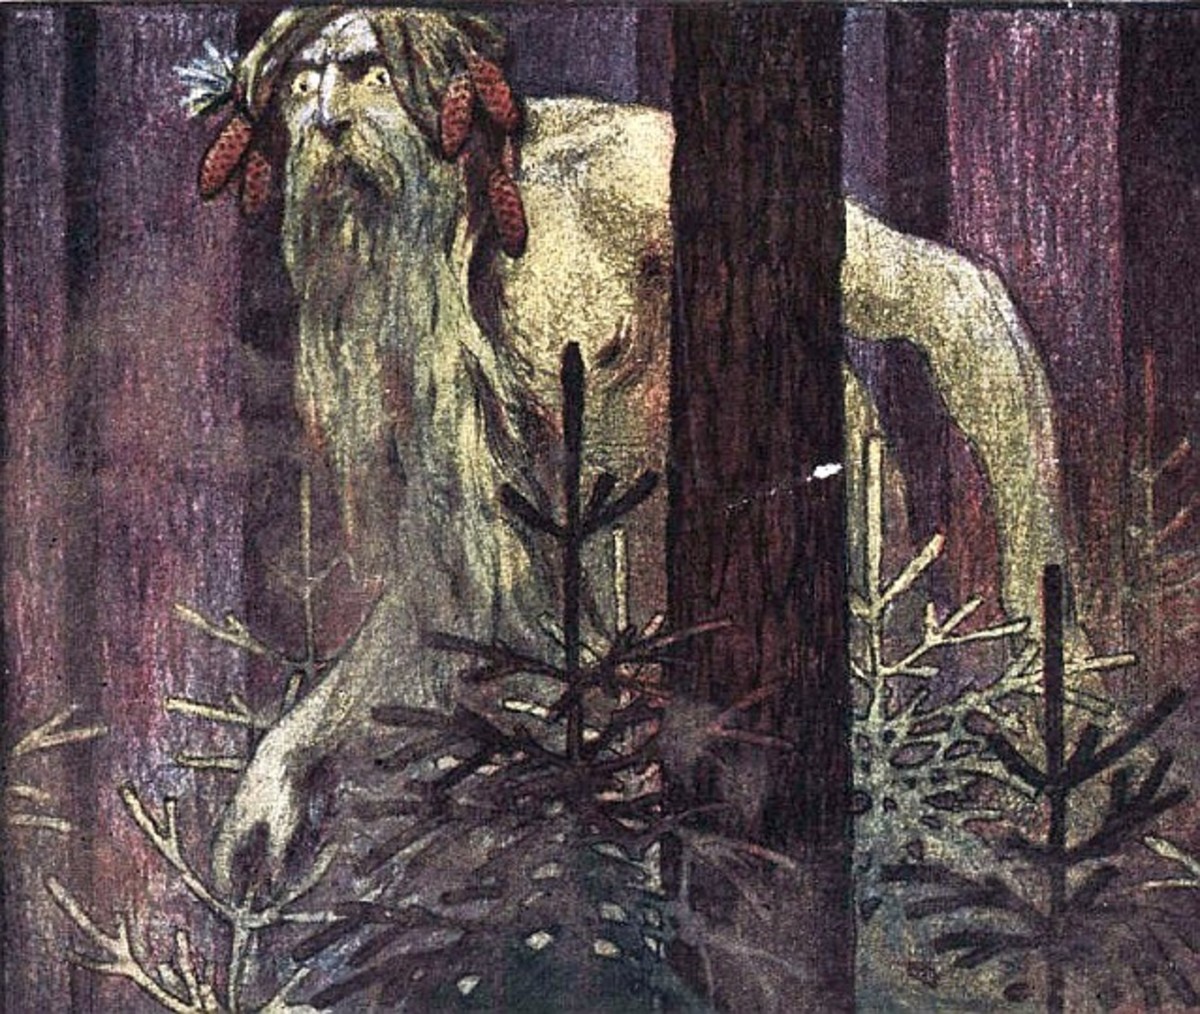 The leshy is a forest garden who is very difficult to spot, though his voice is sometimes heard. The creature was given new life in The Witcher 3.